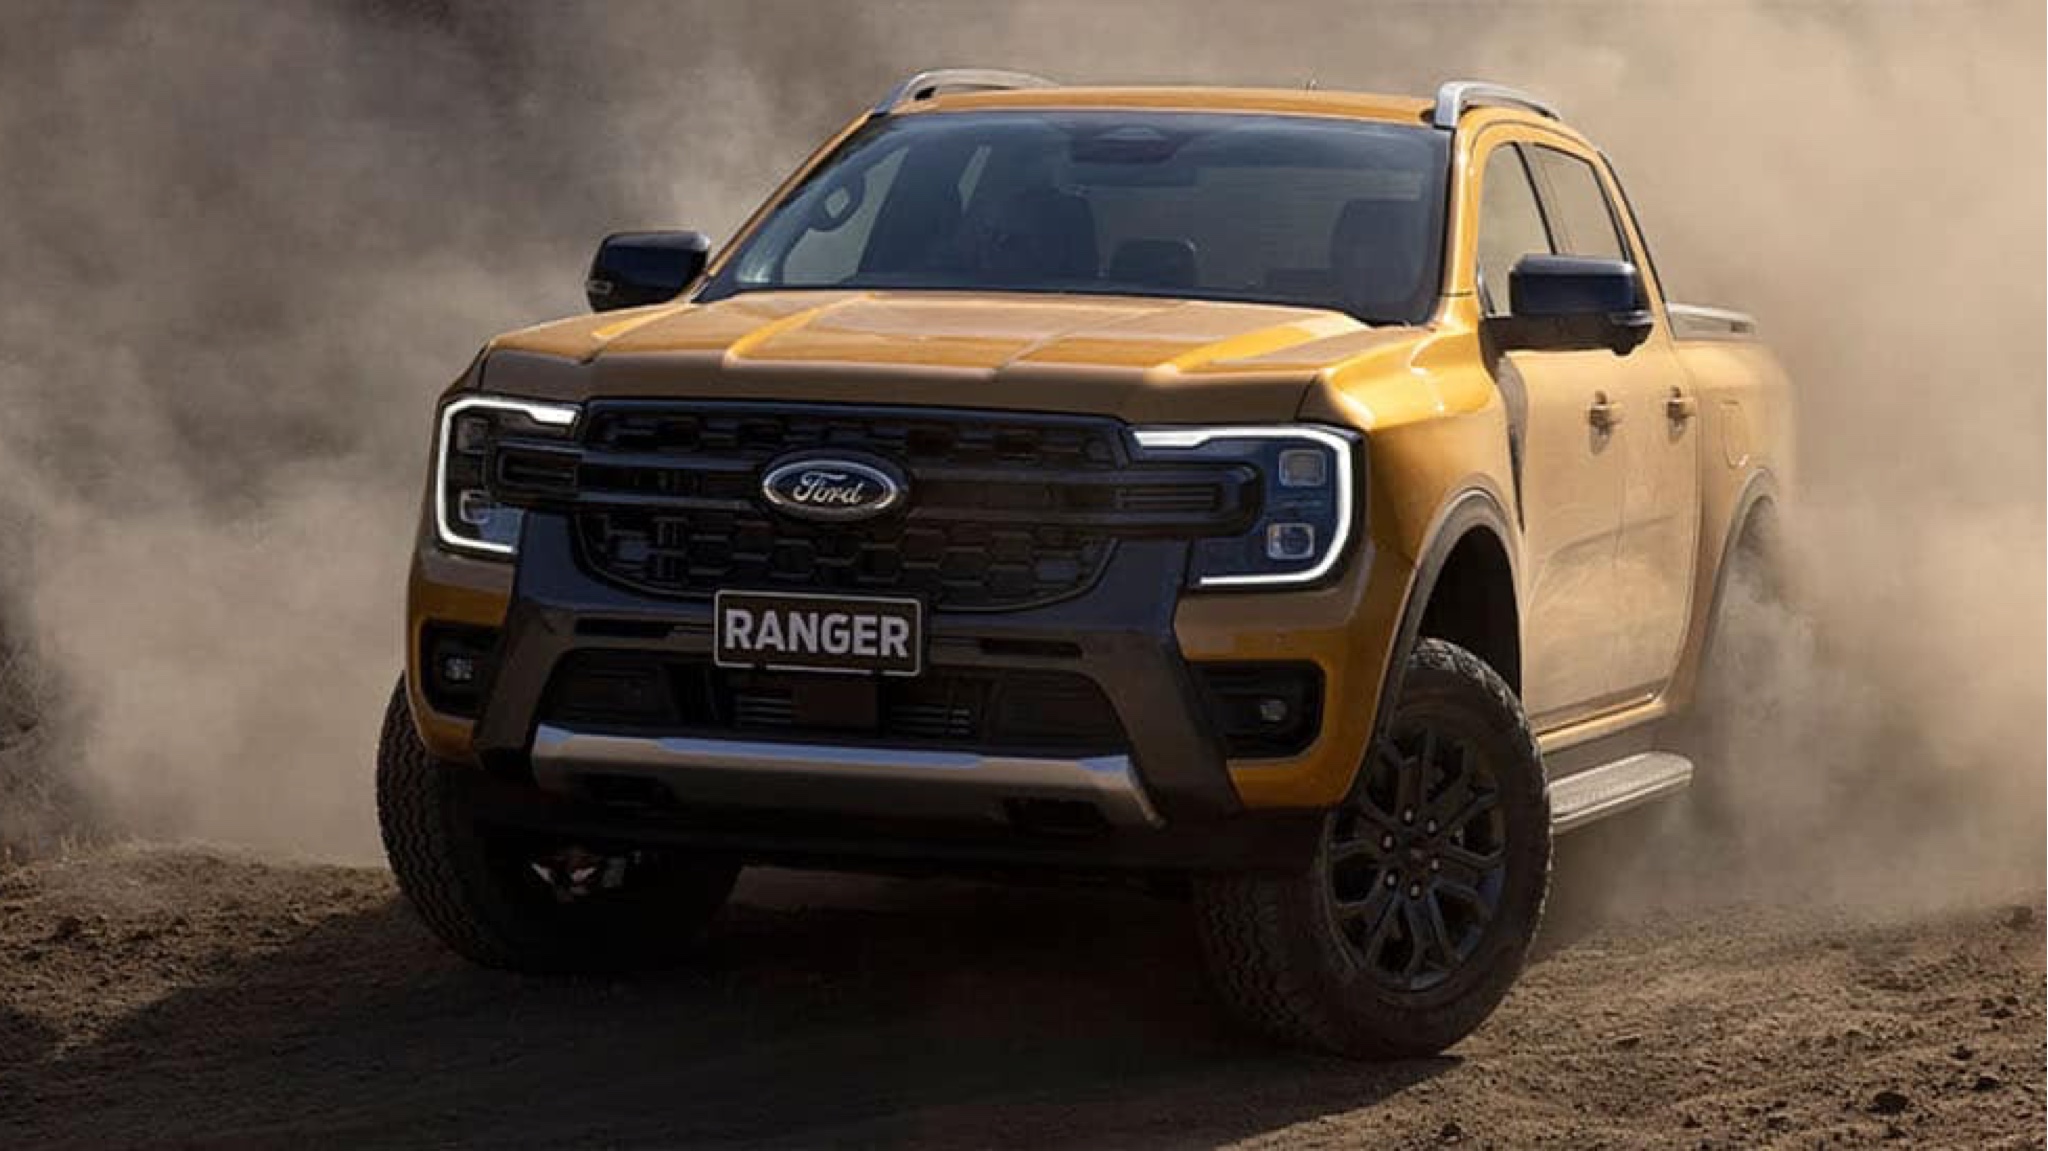 Next Generation 2022 Ford Ranger Pick-up Coming Soon in Batangas Philippines